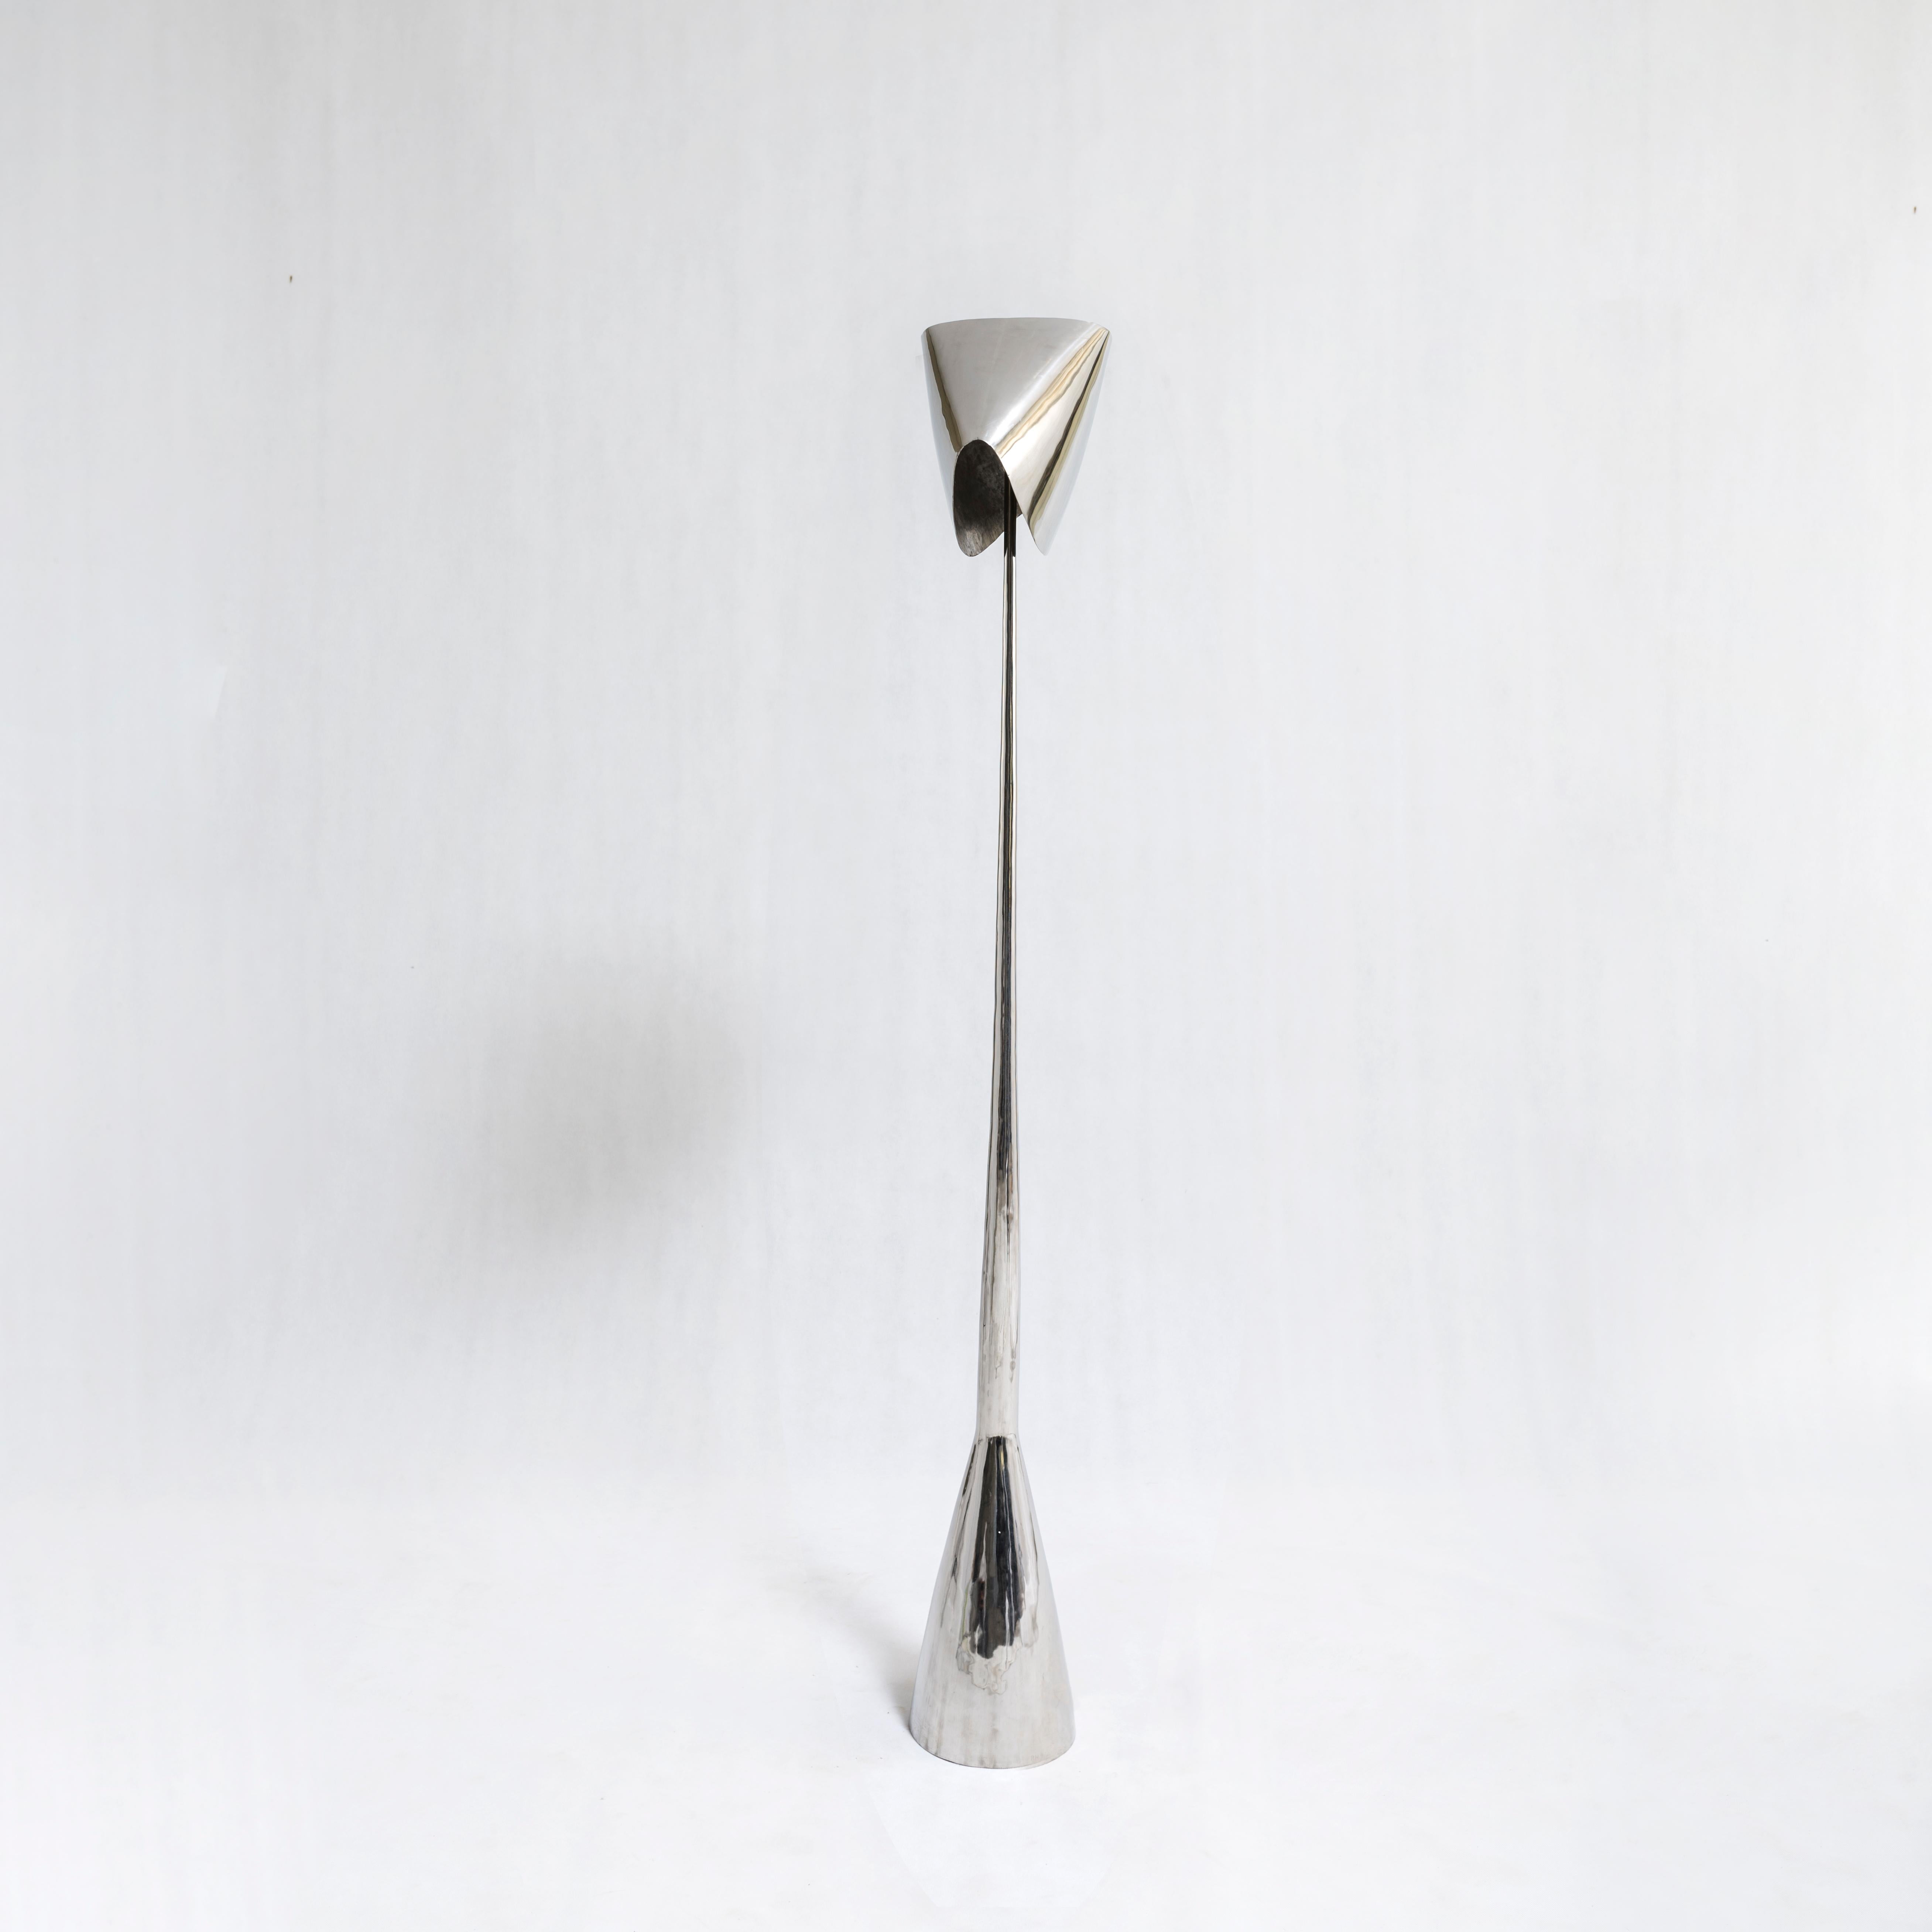 Philippe Hiquily floor lamp
Signed PH
Limited Edition of 100
Stainless steel
France, 2009.